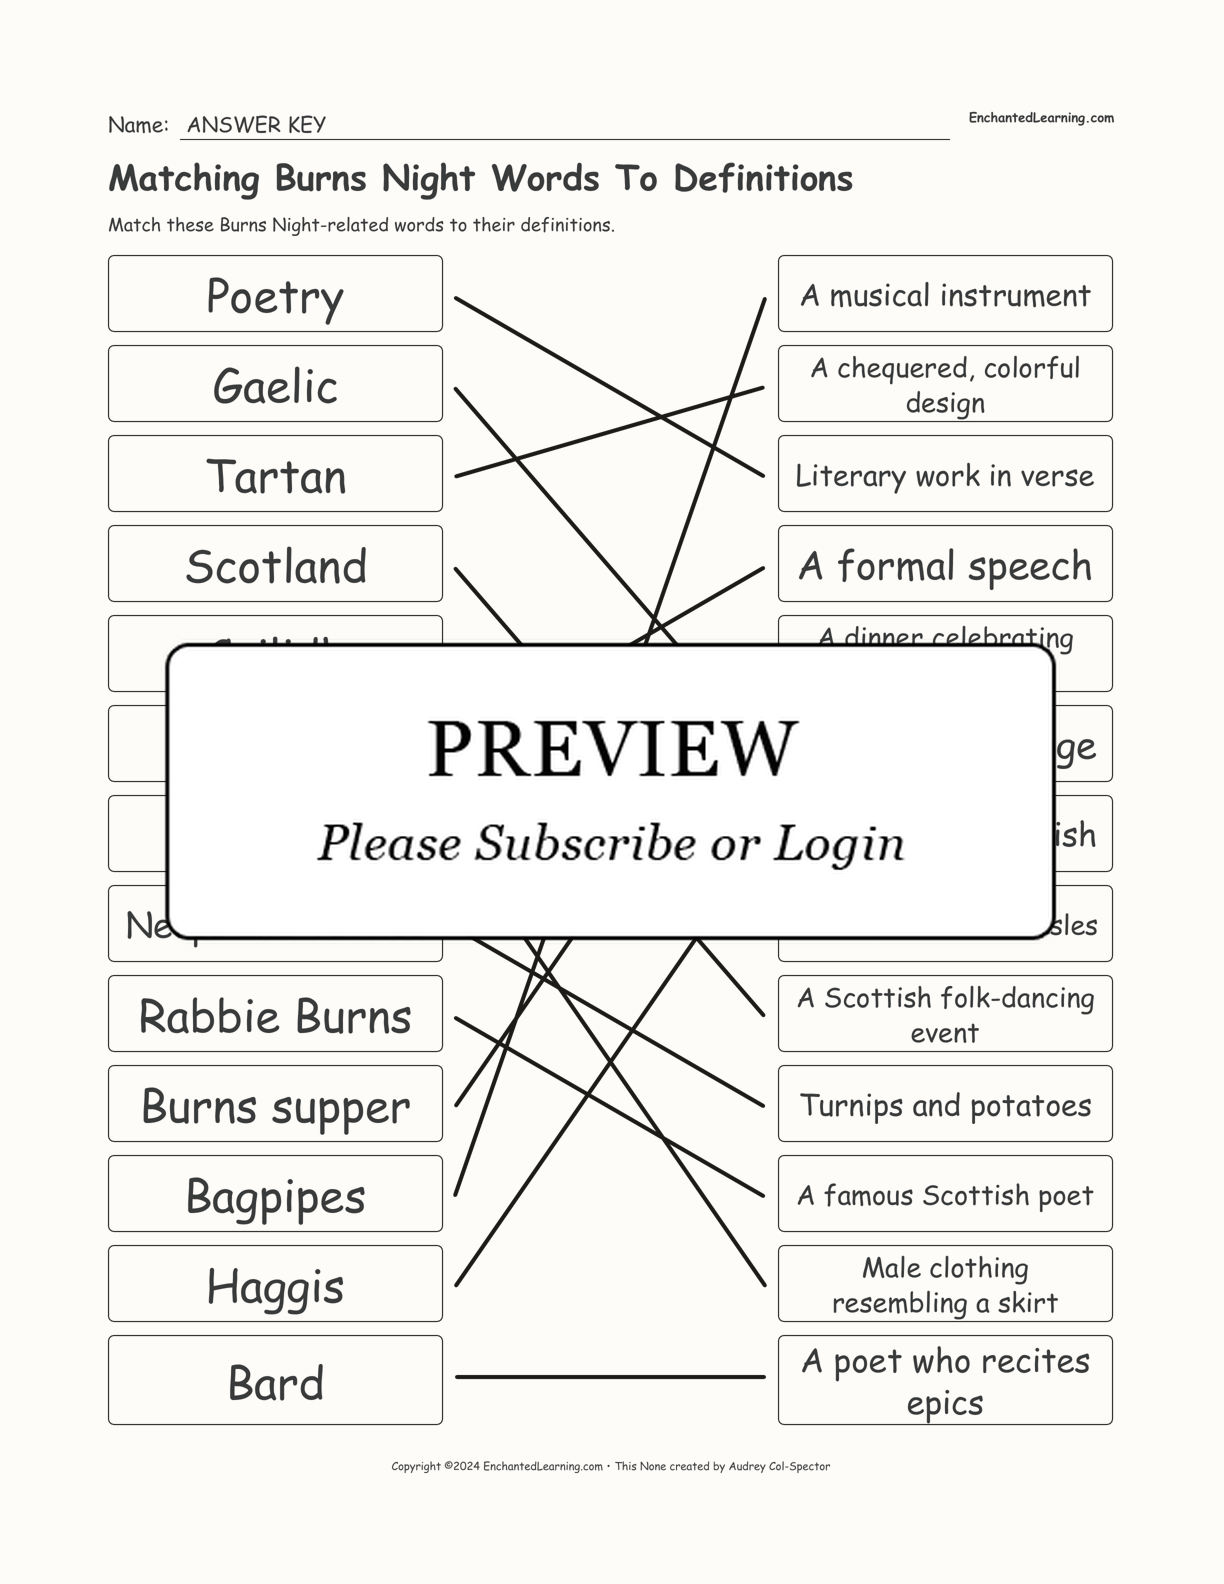 Matching Burns Night Words To Definitions interactive worksheet page 2